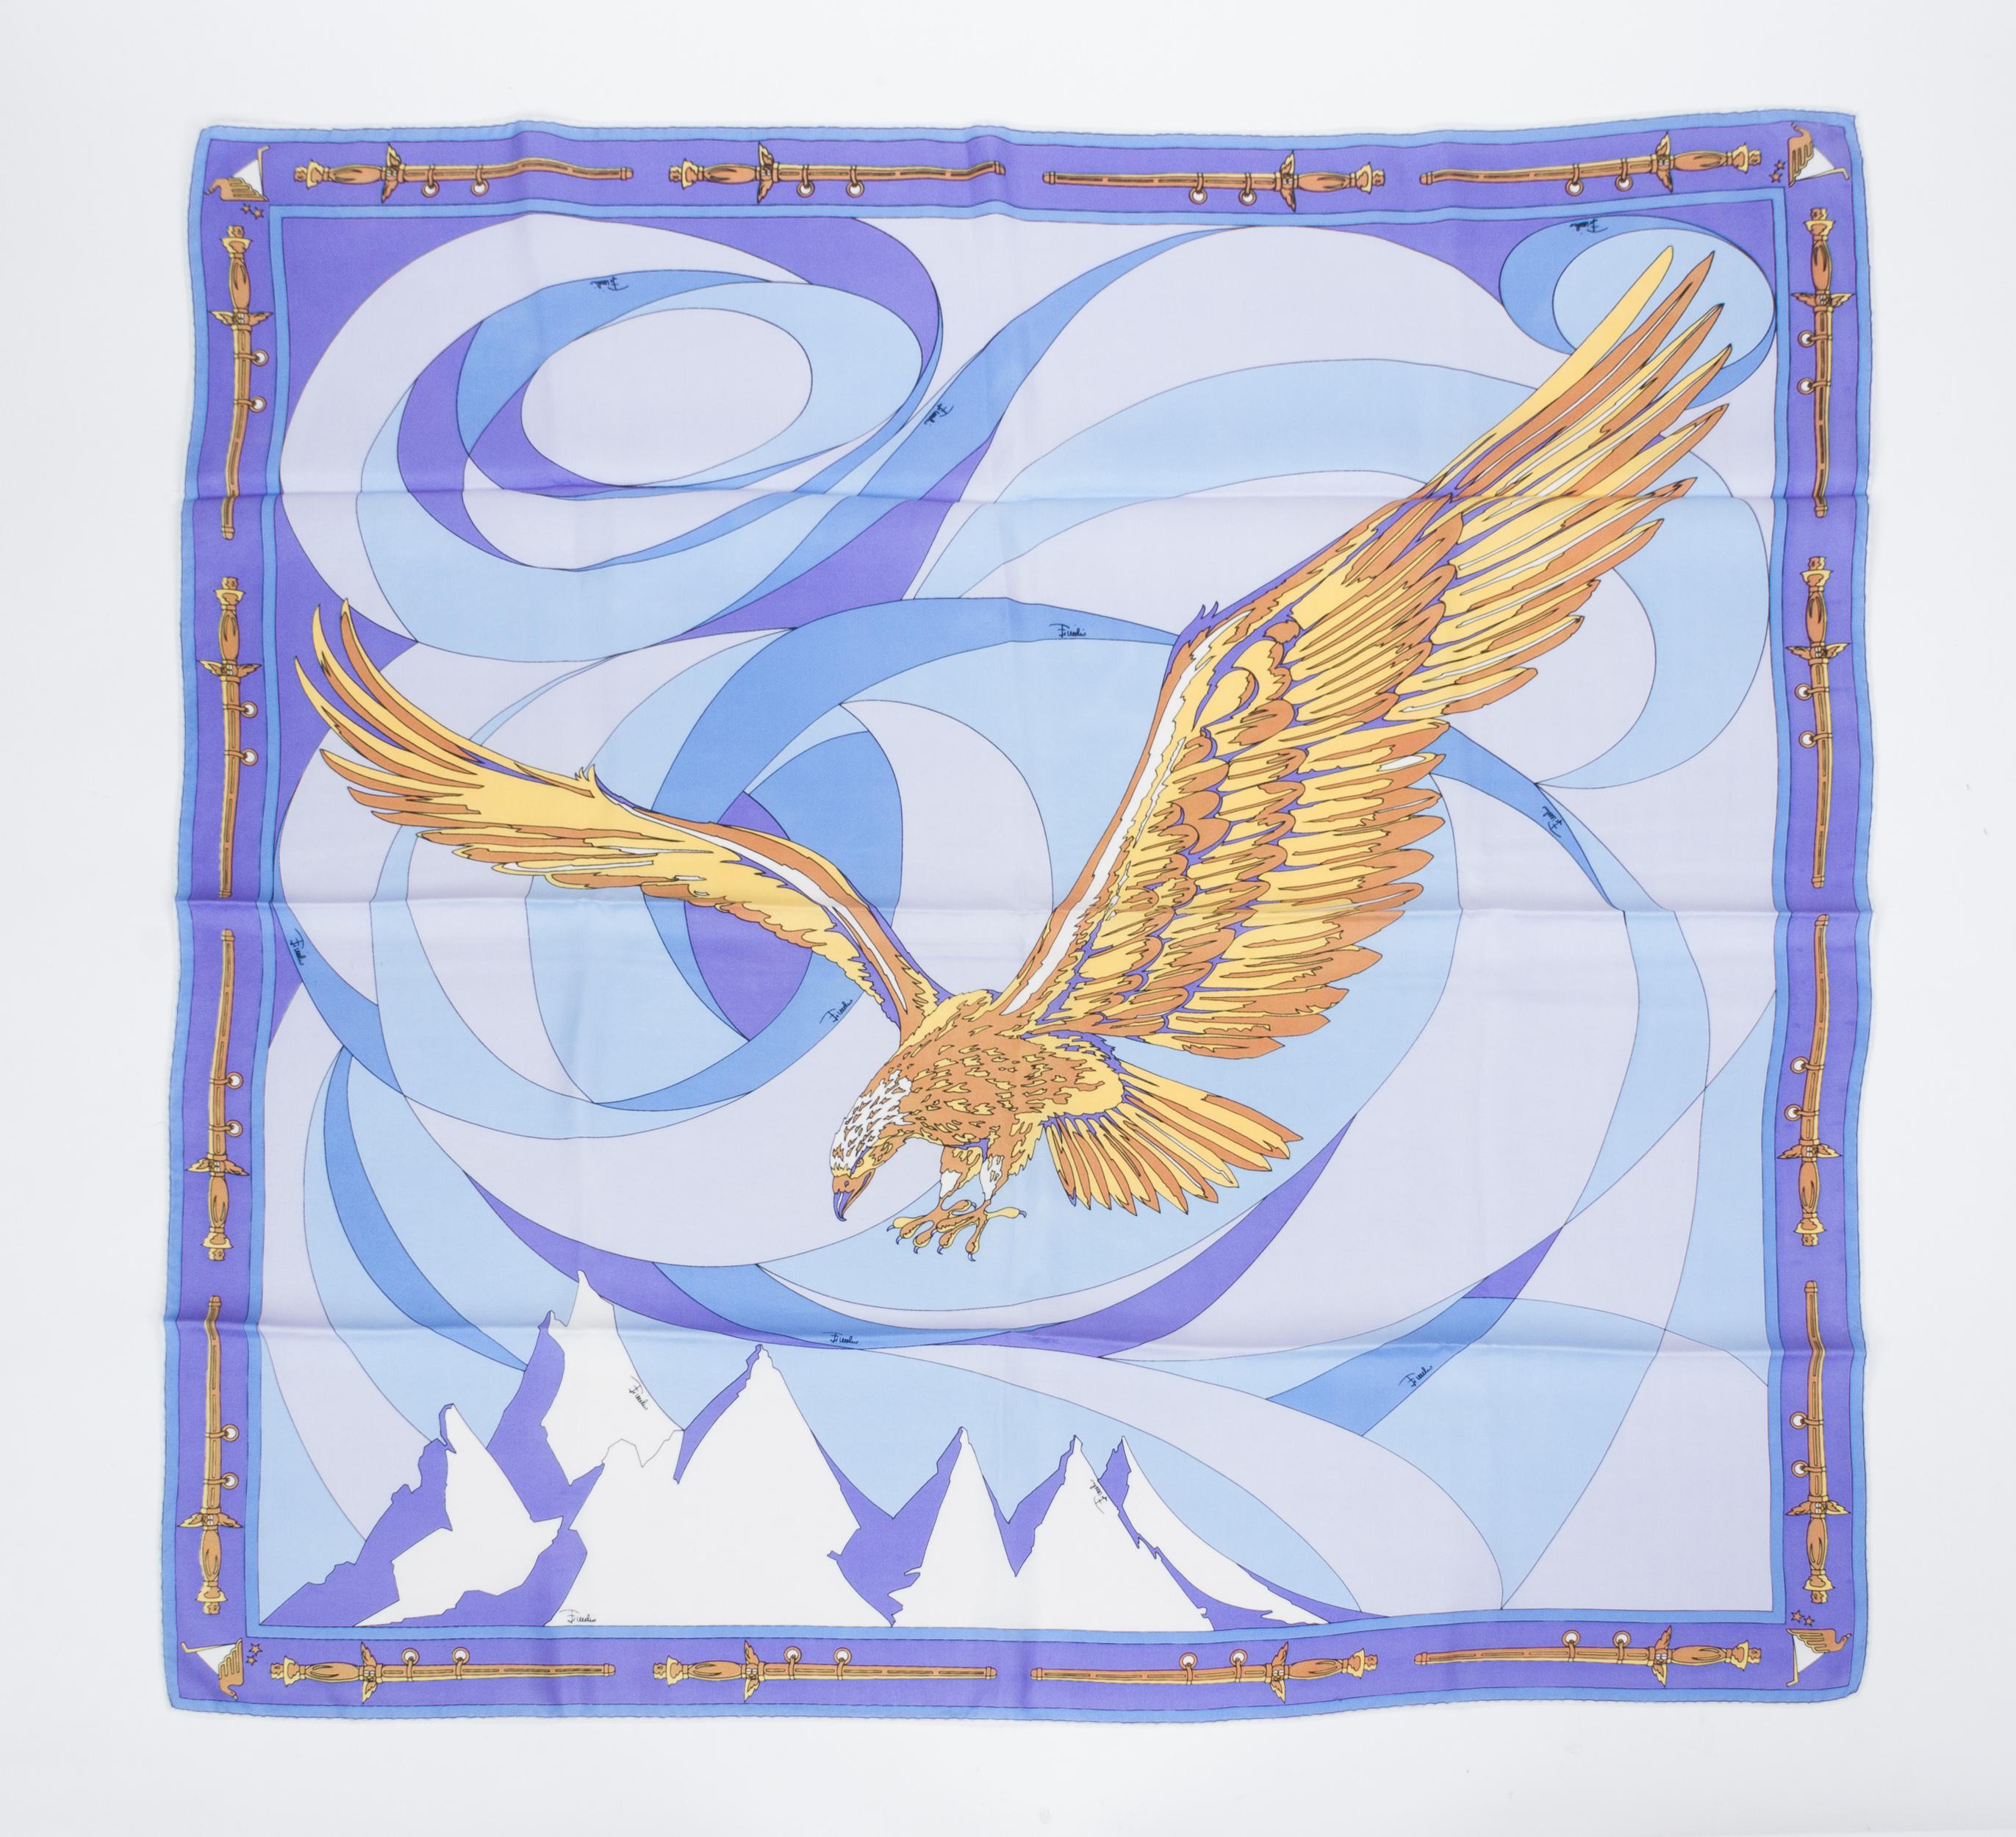 Pucci silk twill purple geometric print scarf with gold center eagle. Hand rolled edges. Does not include box.